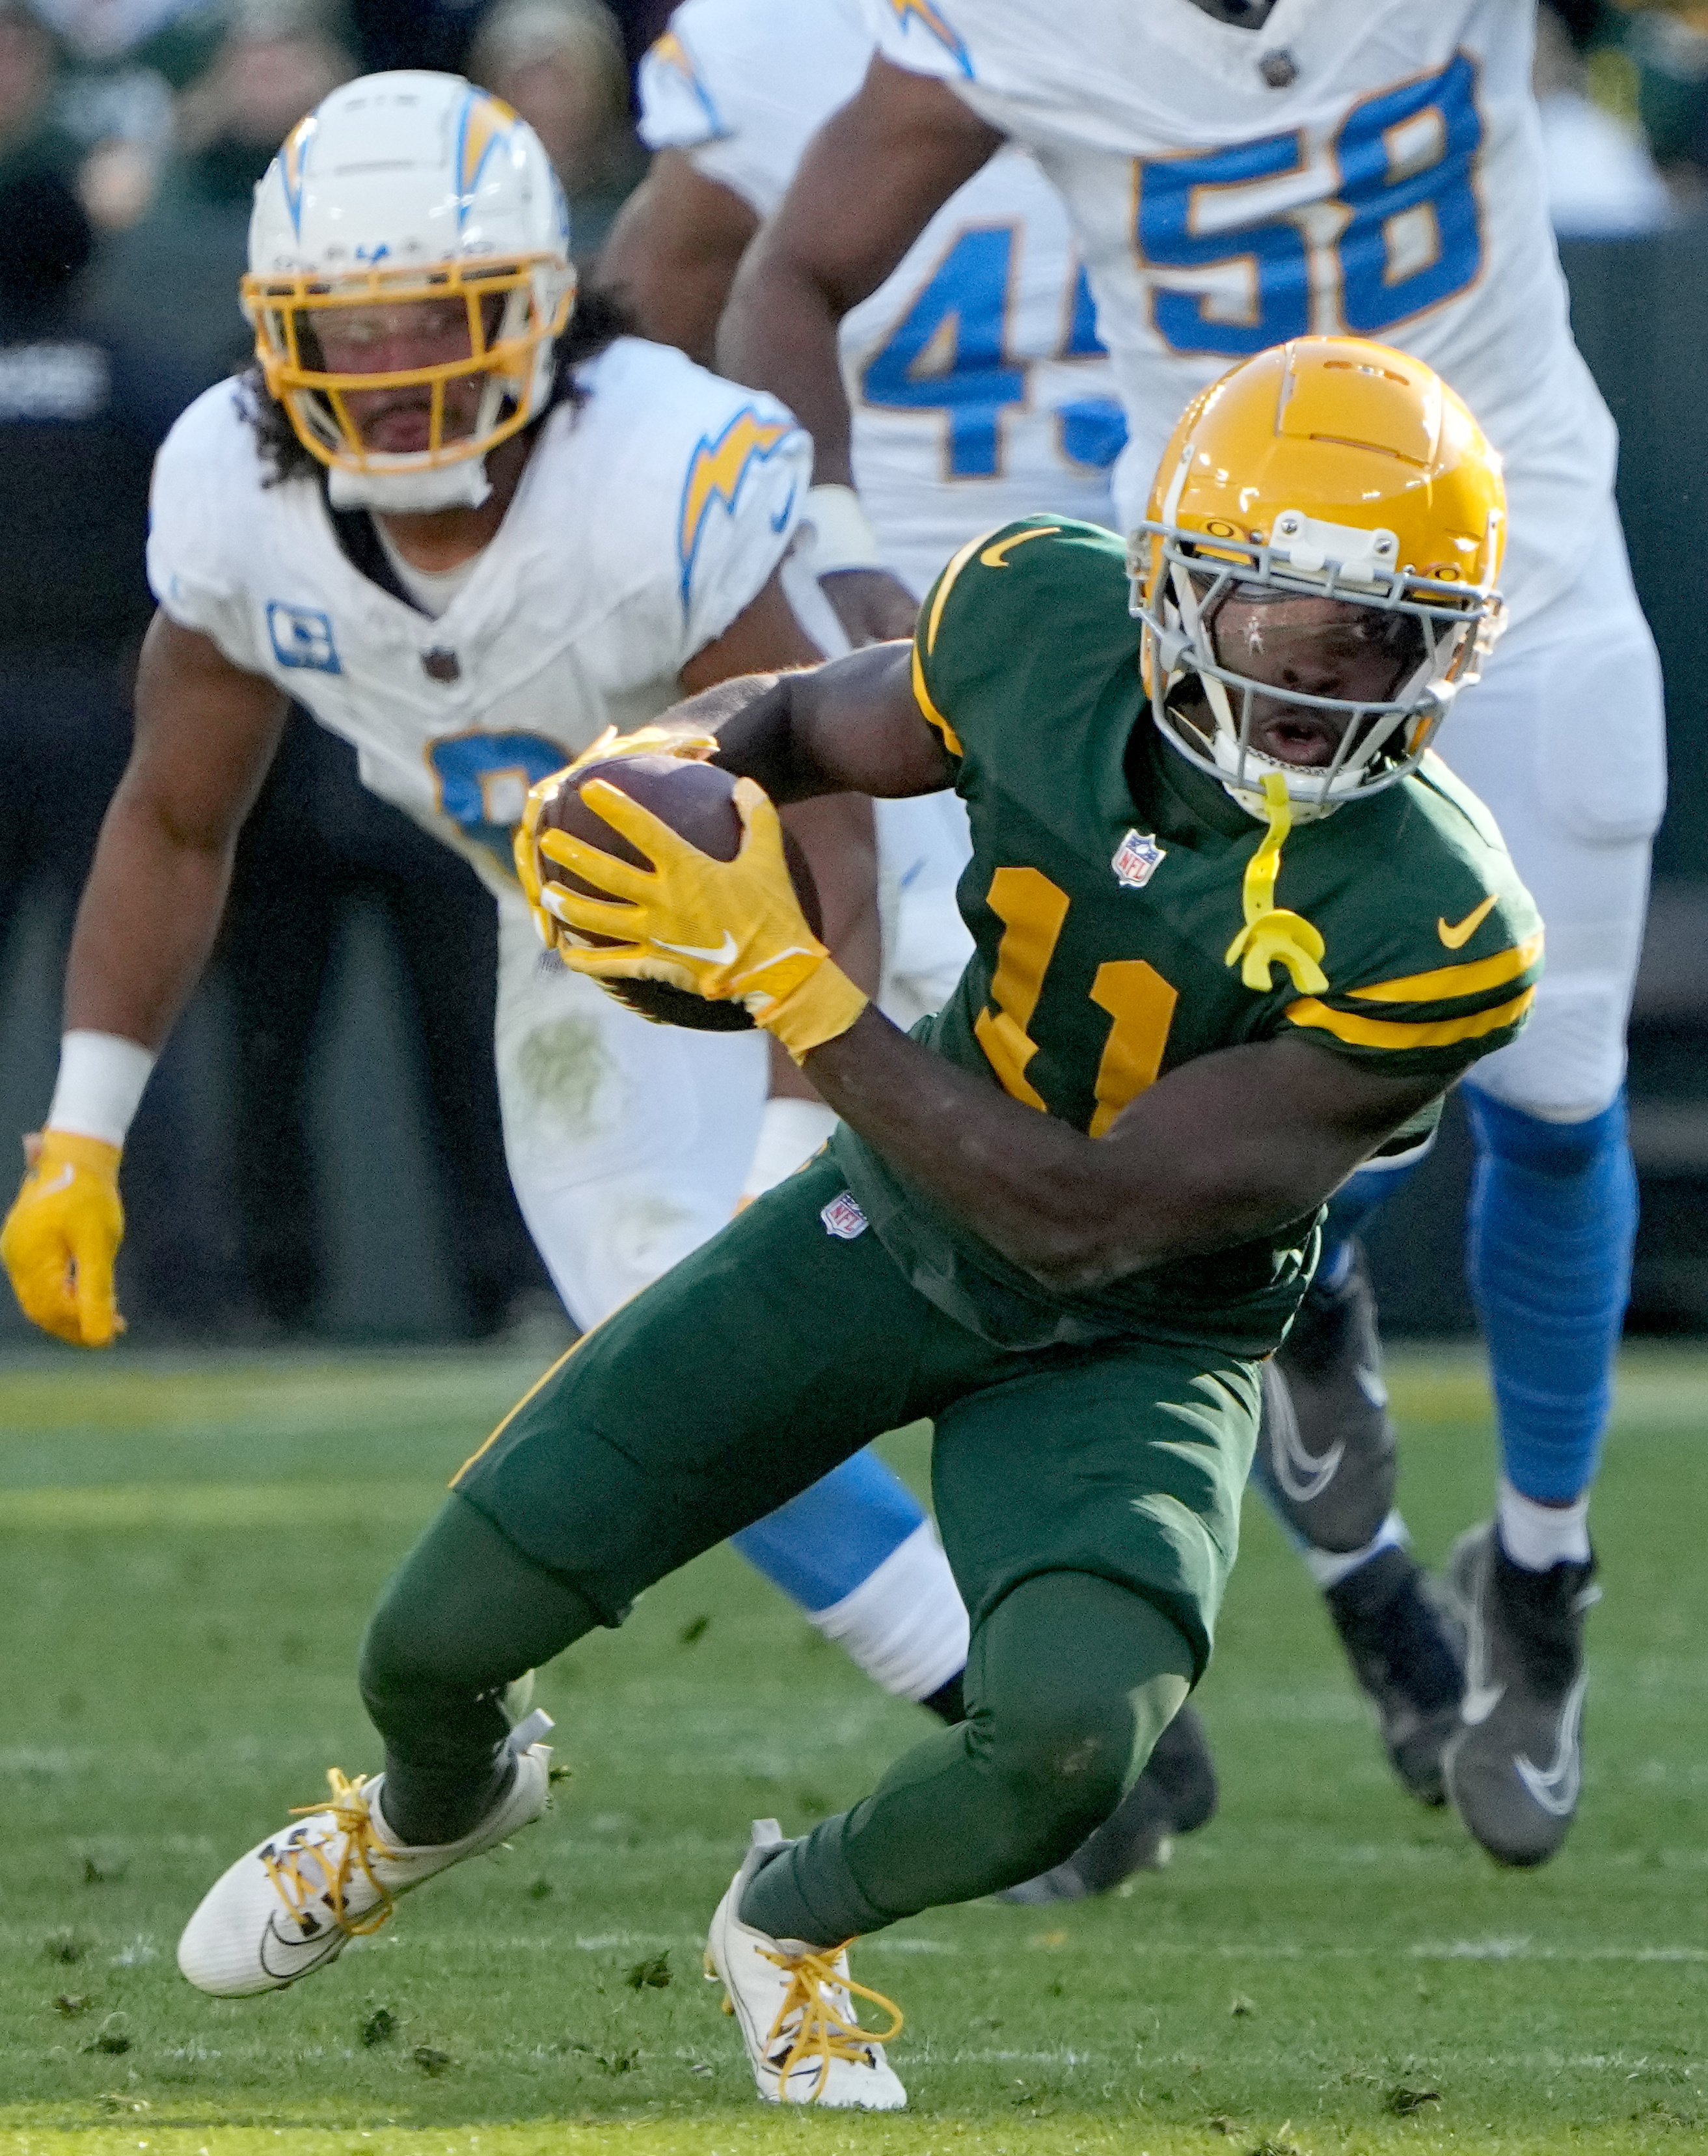 NFL: Los Angeles Chargers at Green Bay Packers